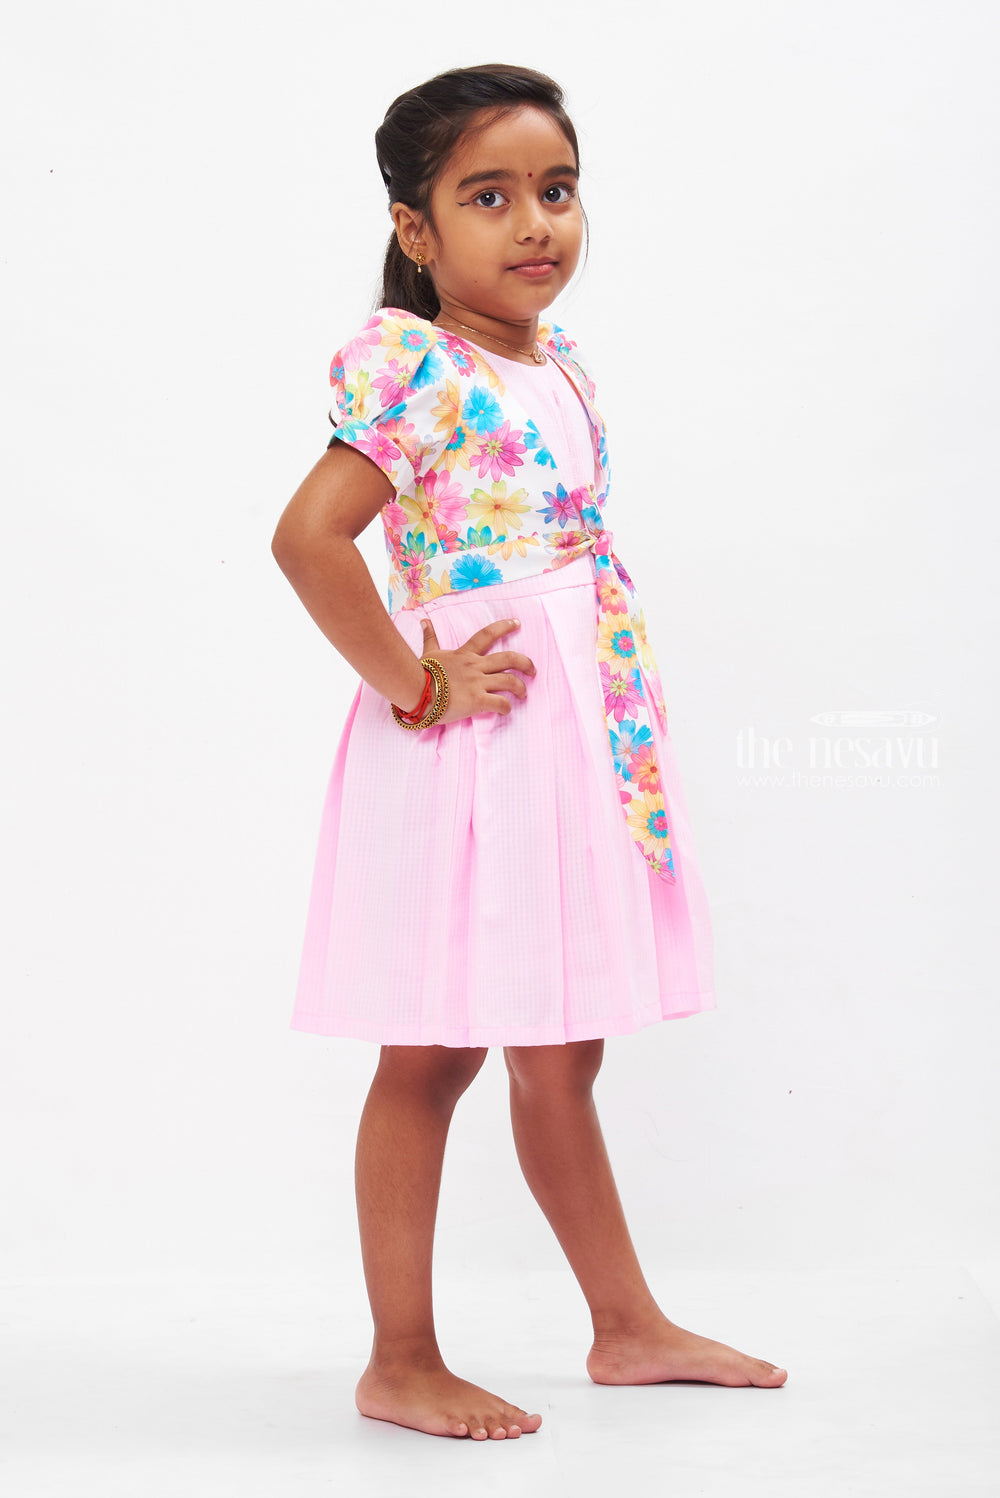 The Nesavu Girls Cotton Frock Blossom-Adorned Pink Checkered Cotton Frock with Jacket for Girls Nesavu Girls Pink Checkered Dress & Floral Jacket Set | Spring Cotton Outfit | The Nesavu